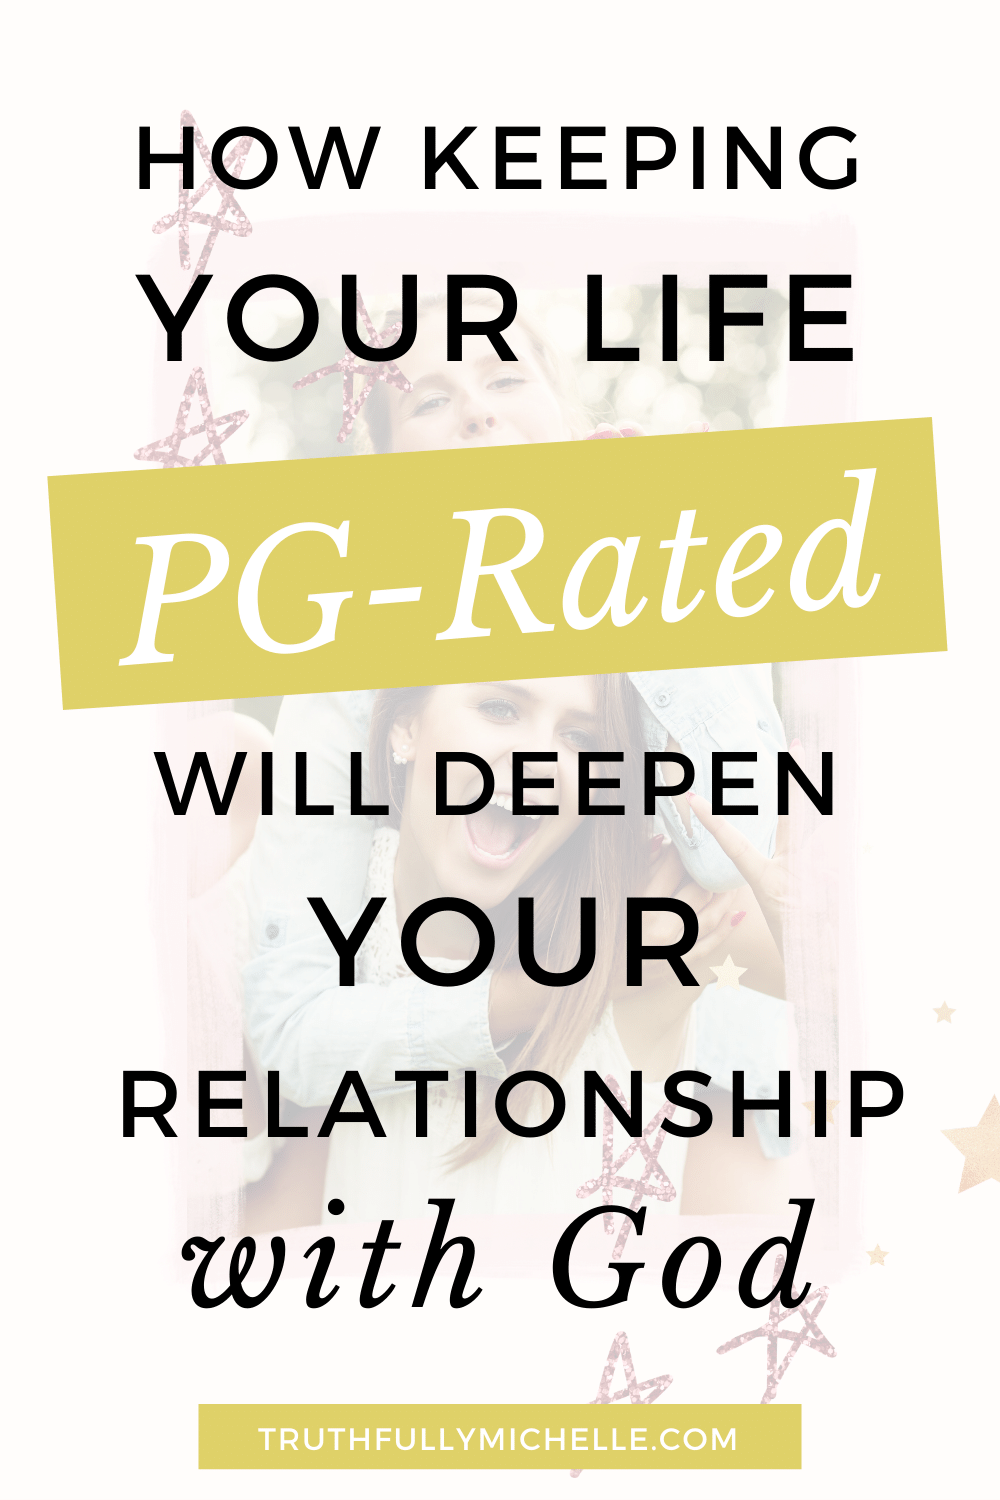 how to grow your relationship with God, how to grow deeper in your relationship with God, how to deepen your relationship with God, how to build your relationship with God, how to improve your relationship with God